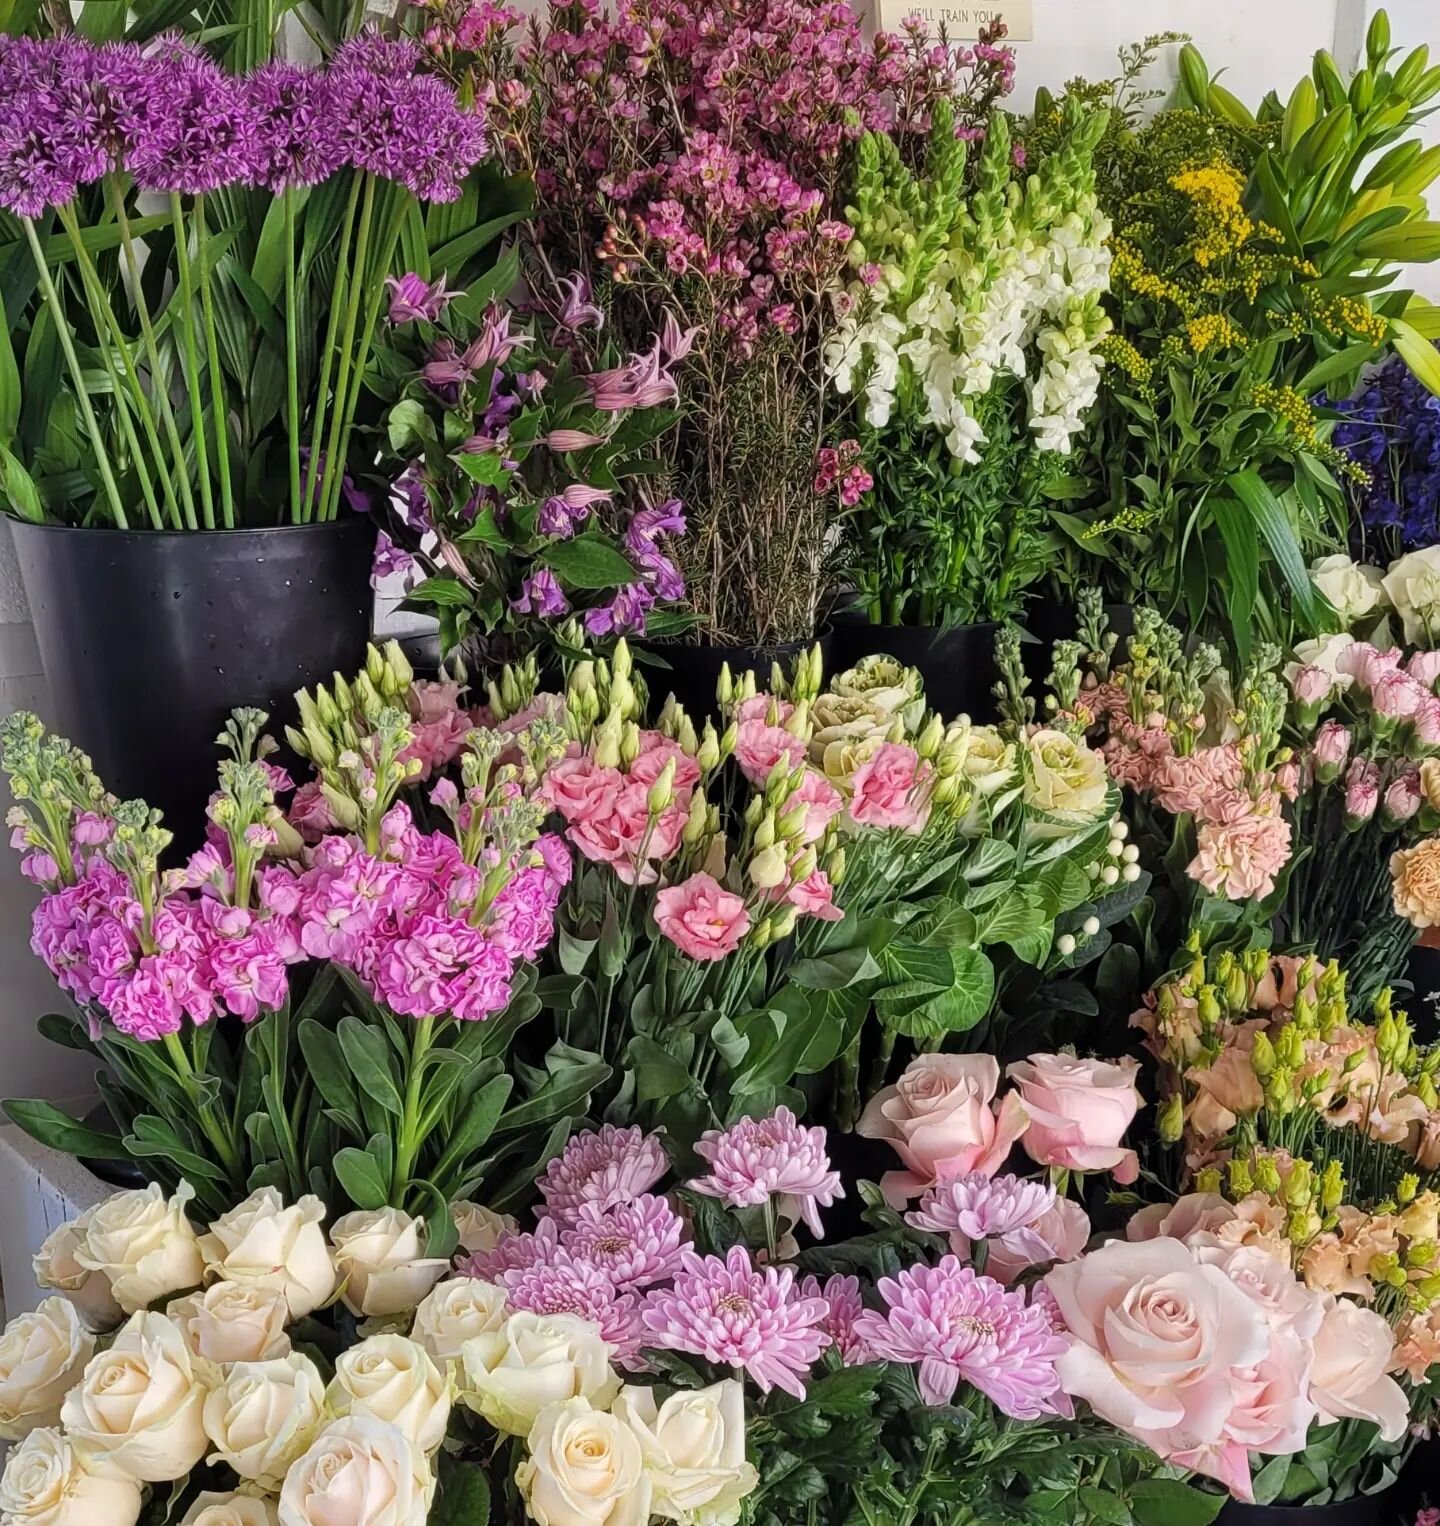 We are back to work today after a long weekend in Devon catching up with family. Nice to have a full flower stand #flowerdeliveries #flowersforeveryone #flowerstand